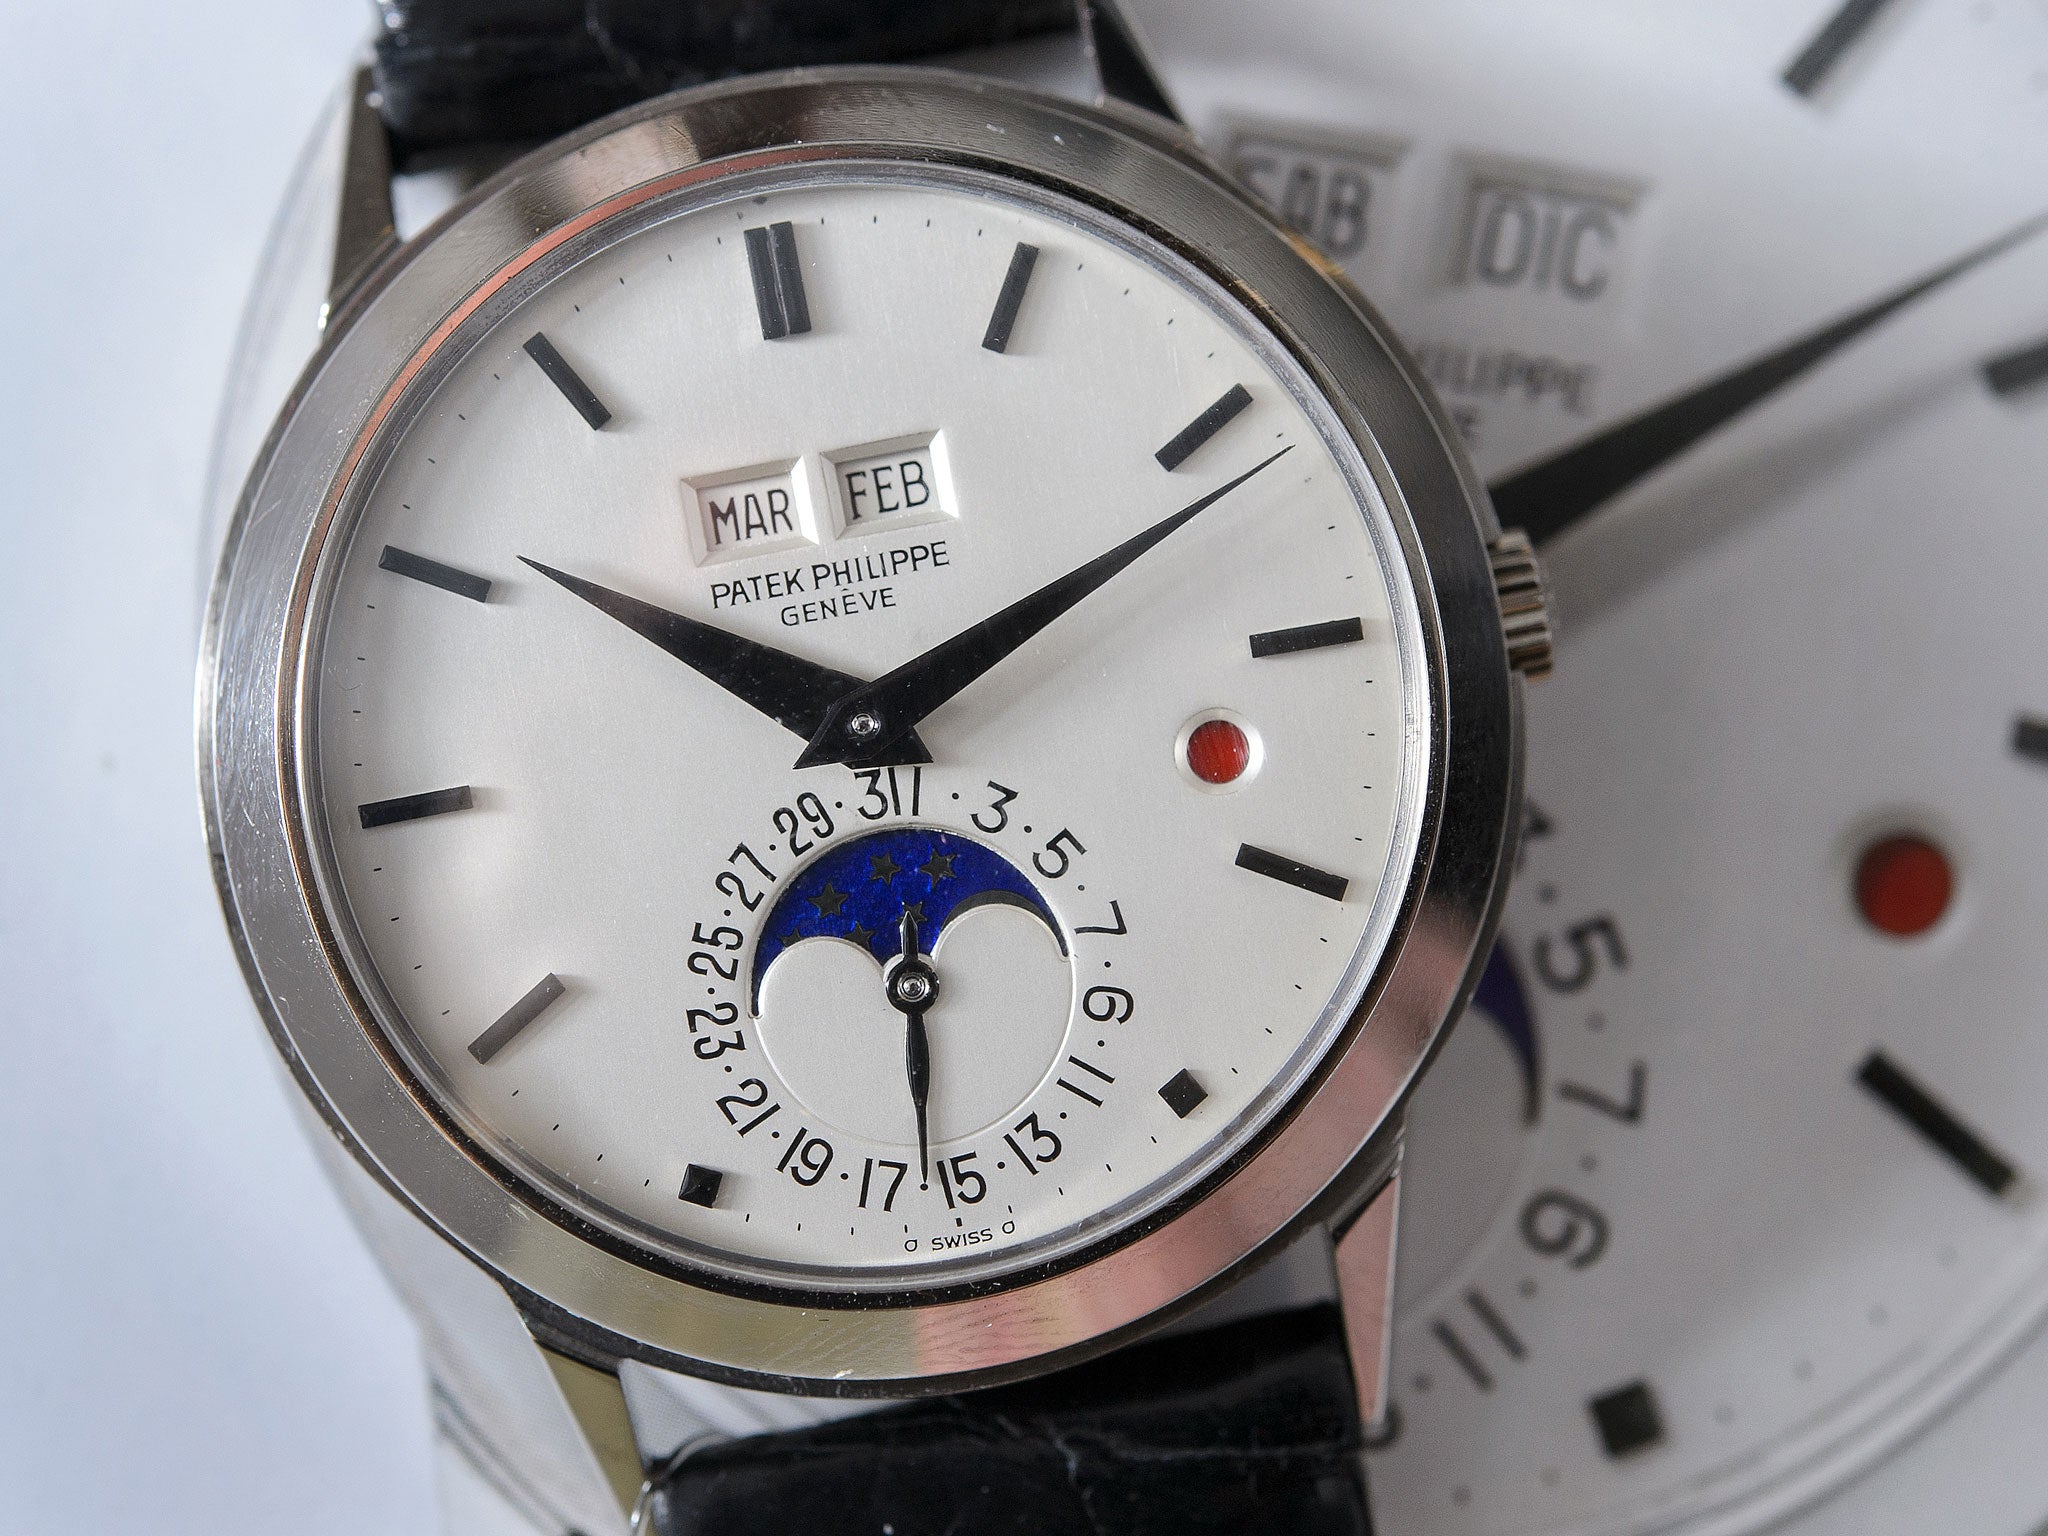 A perpetual calendar wristwatch with moon phases and leap-year by Swiss watchmaker Patek Philippe